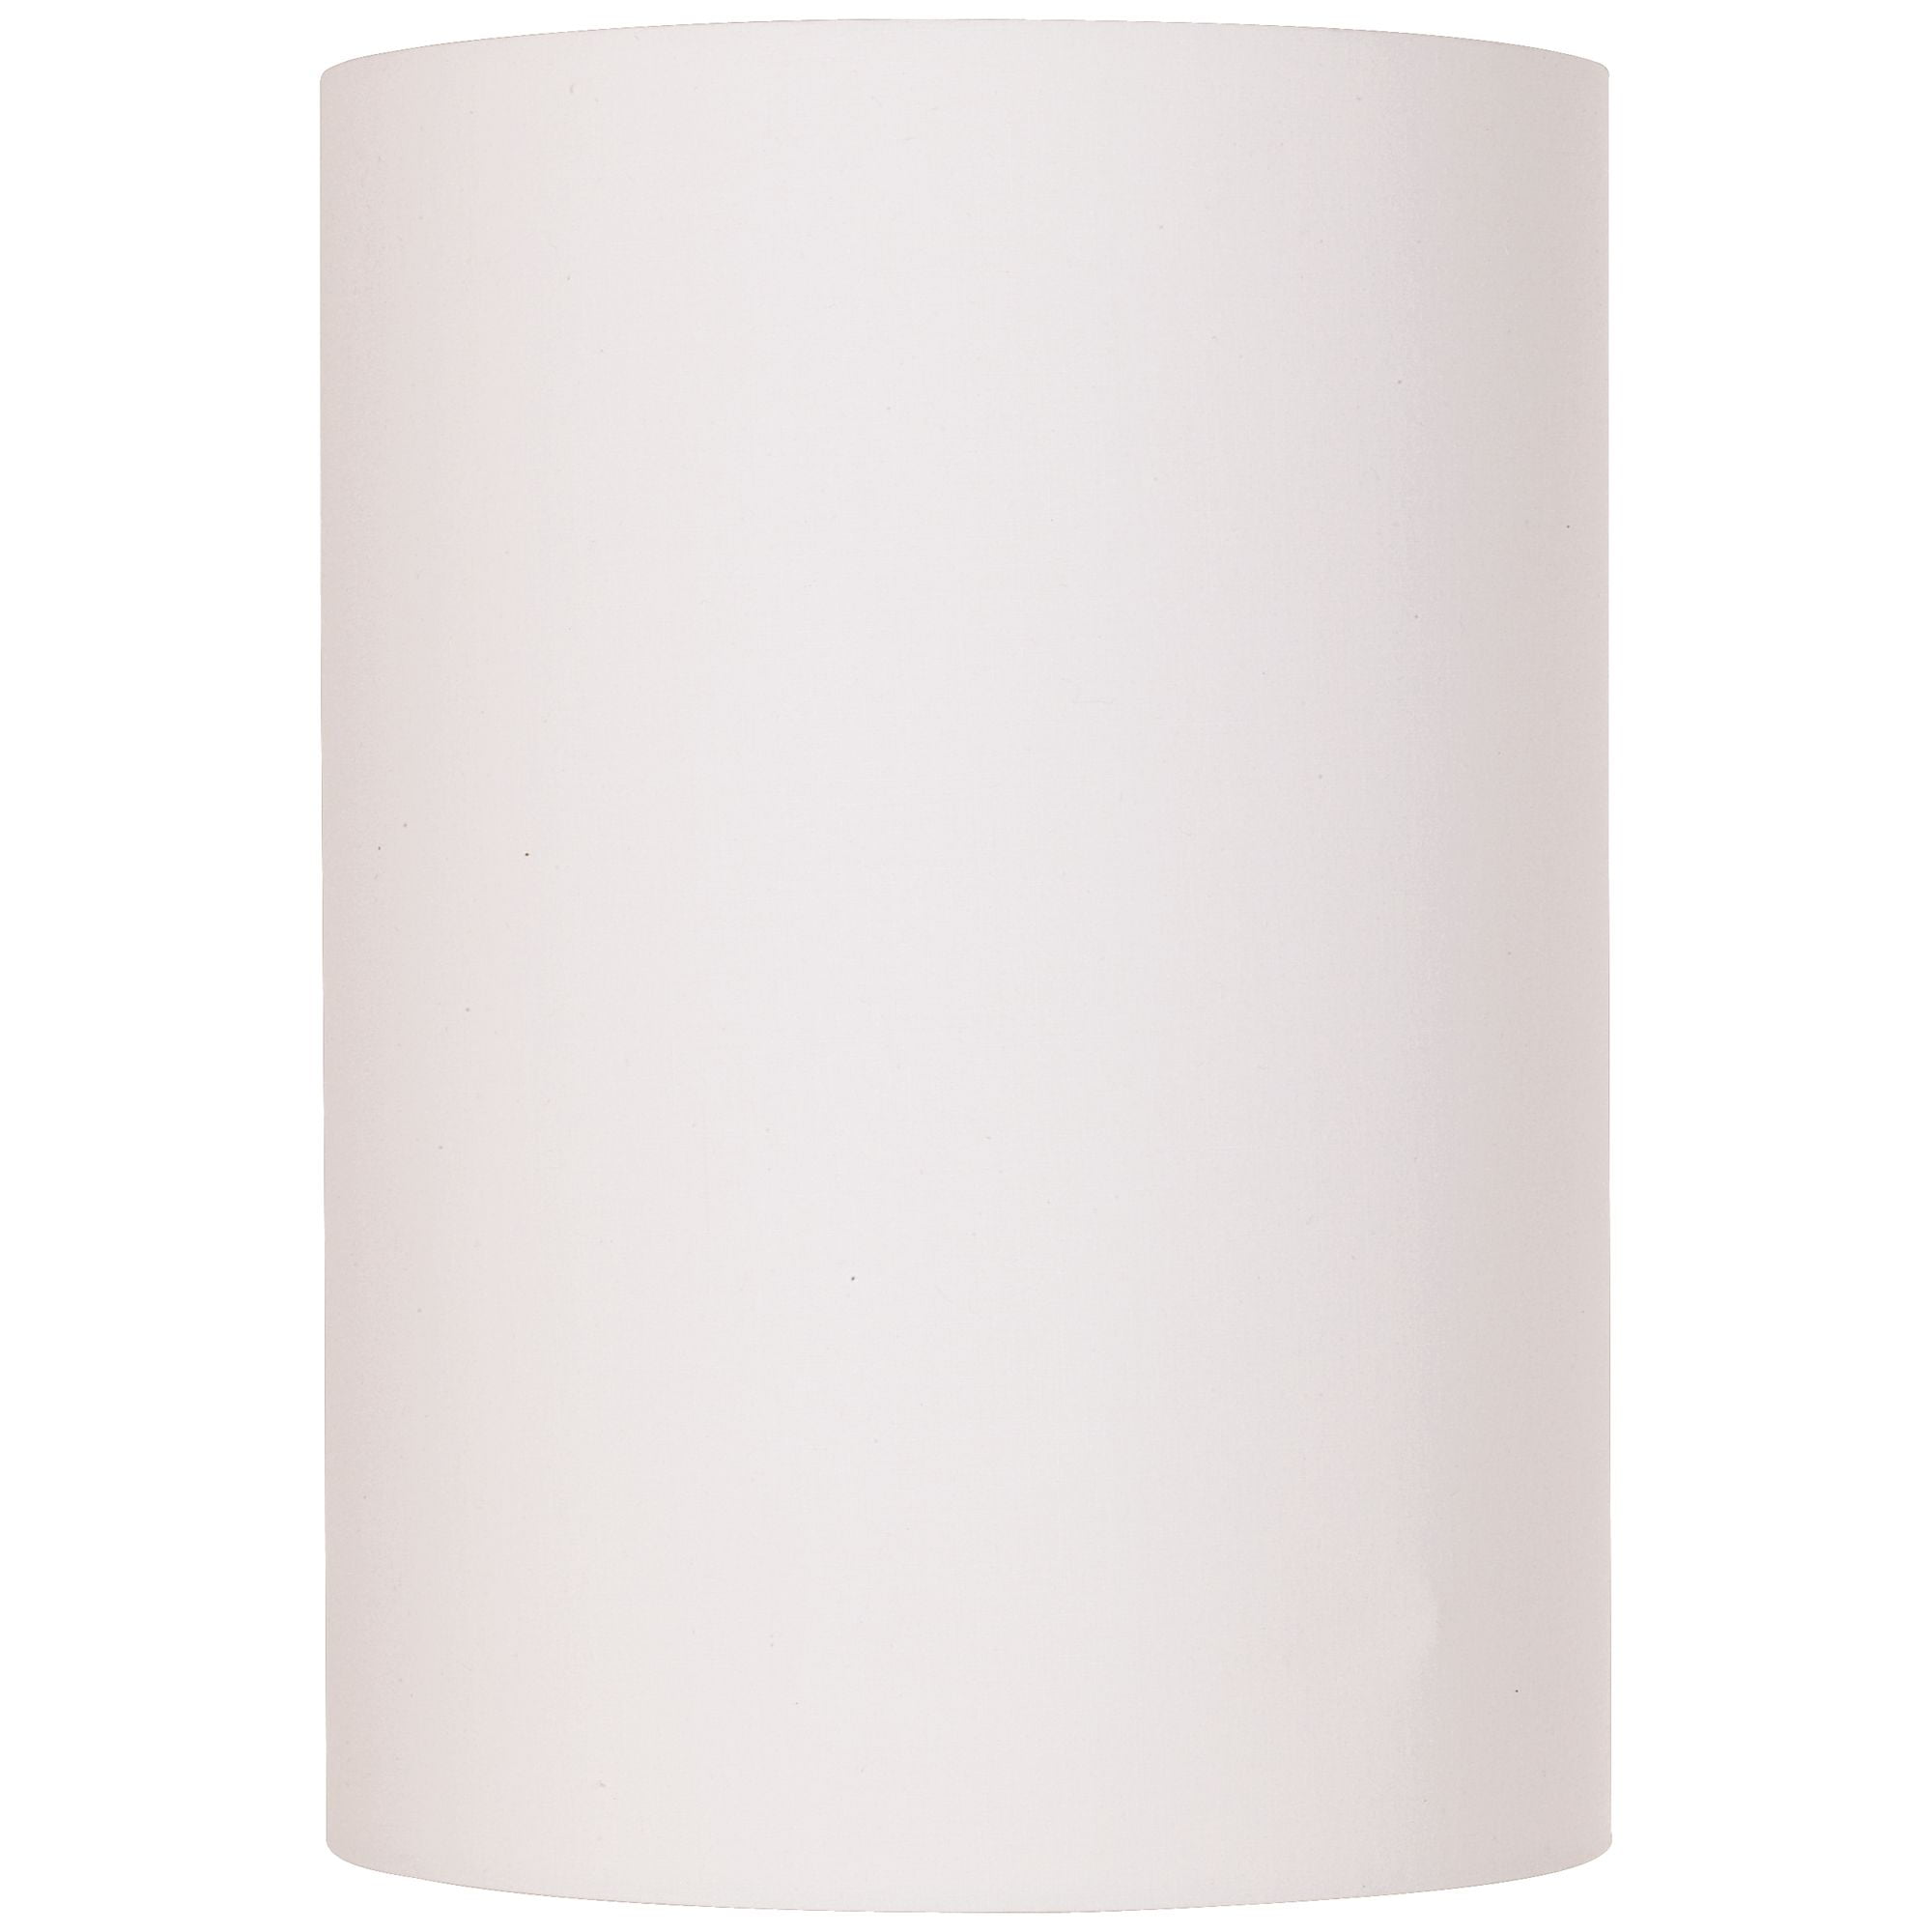 Bwood White Cotton Small Drum, Thin Drum Lamp Shades